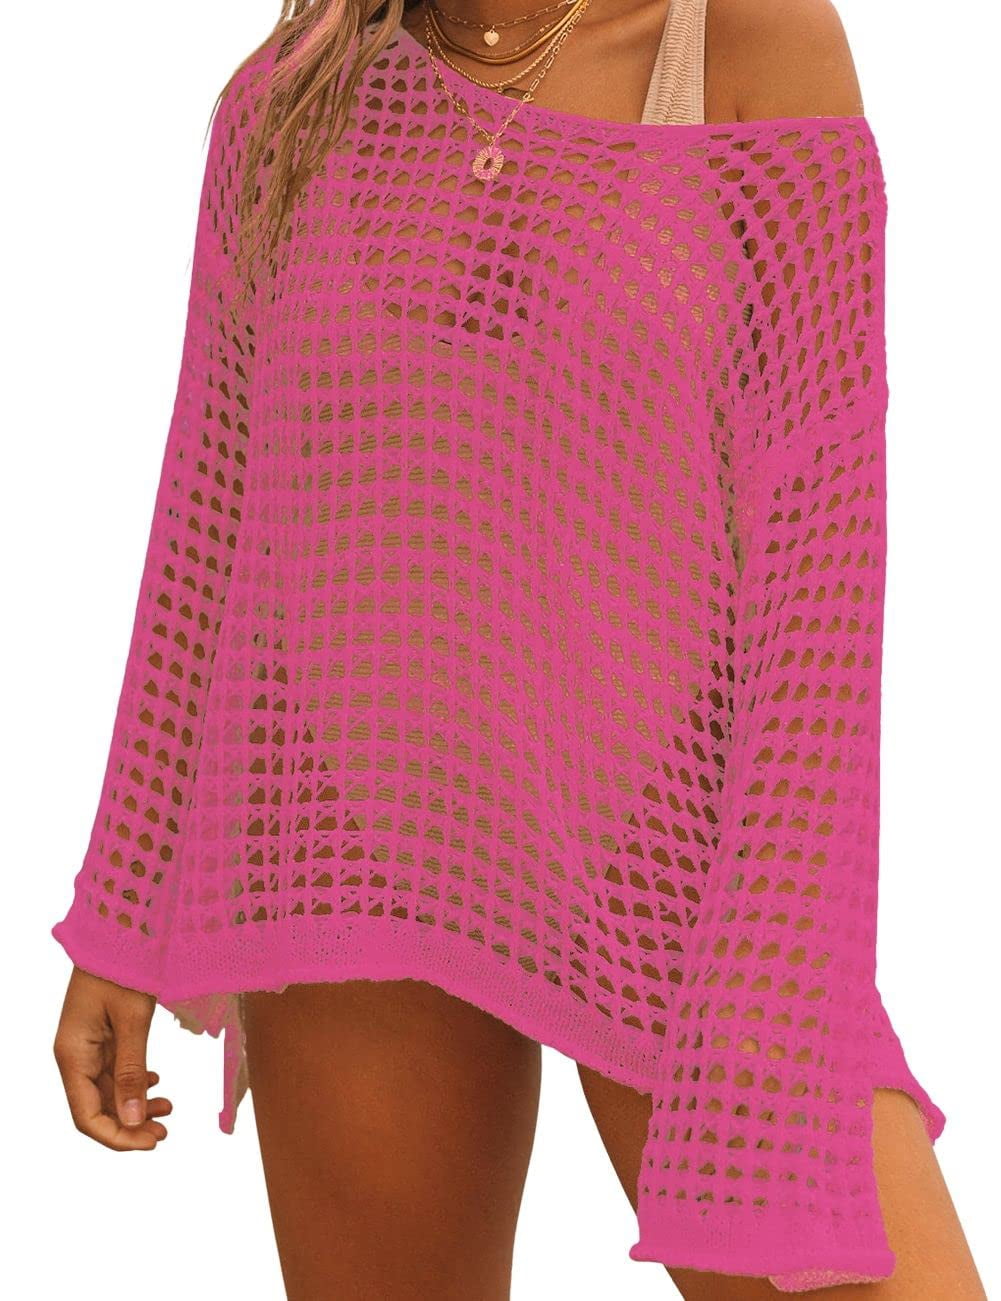 Bsubseach Crochet Cover Ups for Women Hollow Out Bathing Suit Cover up ...